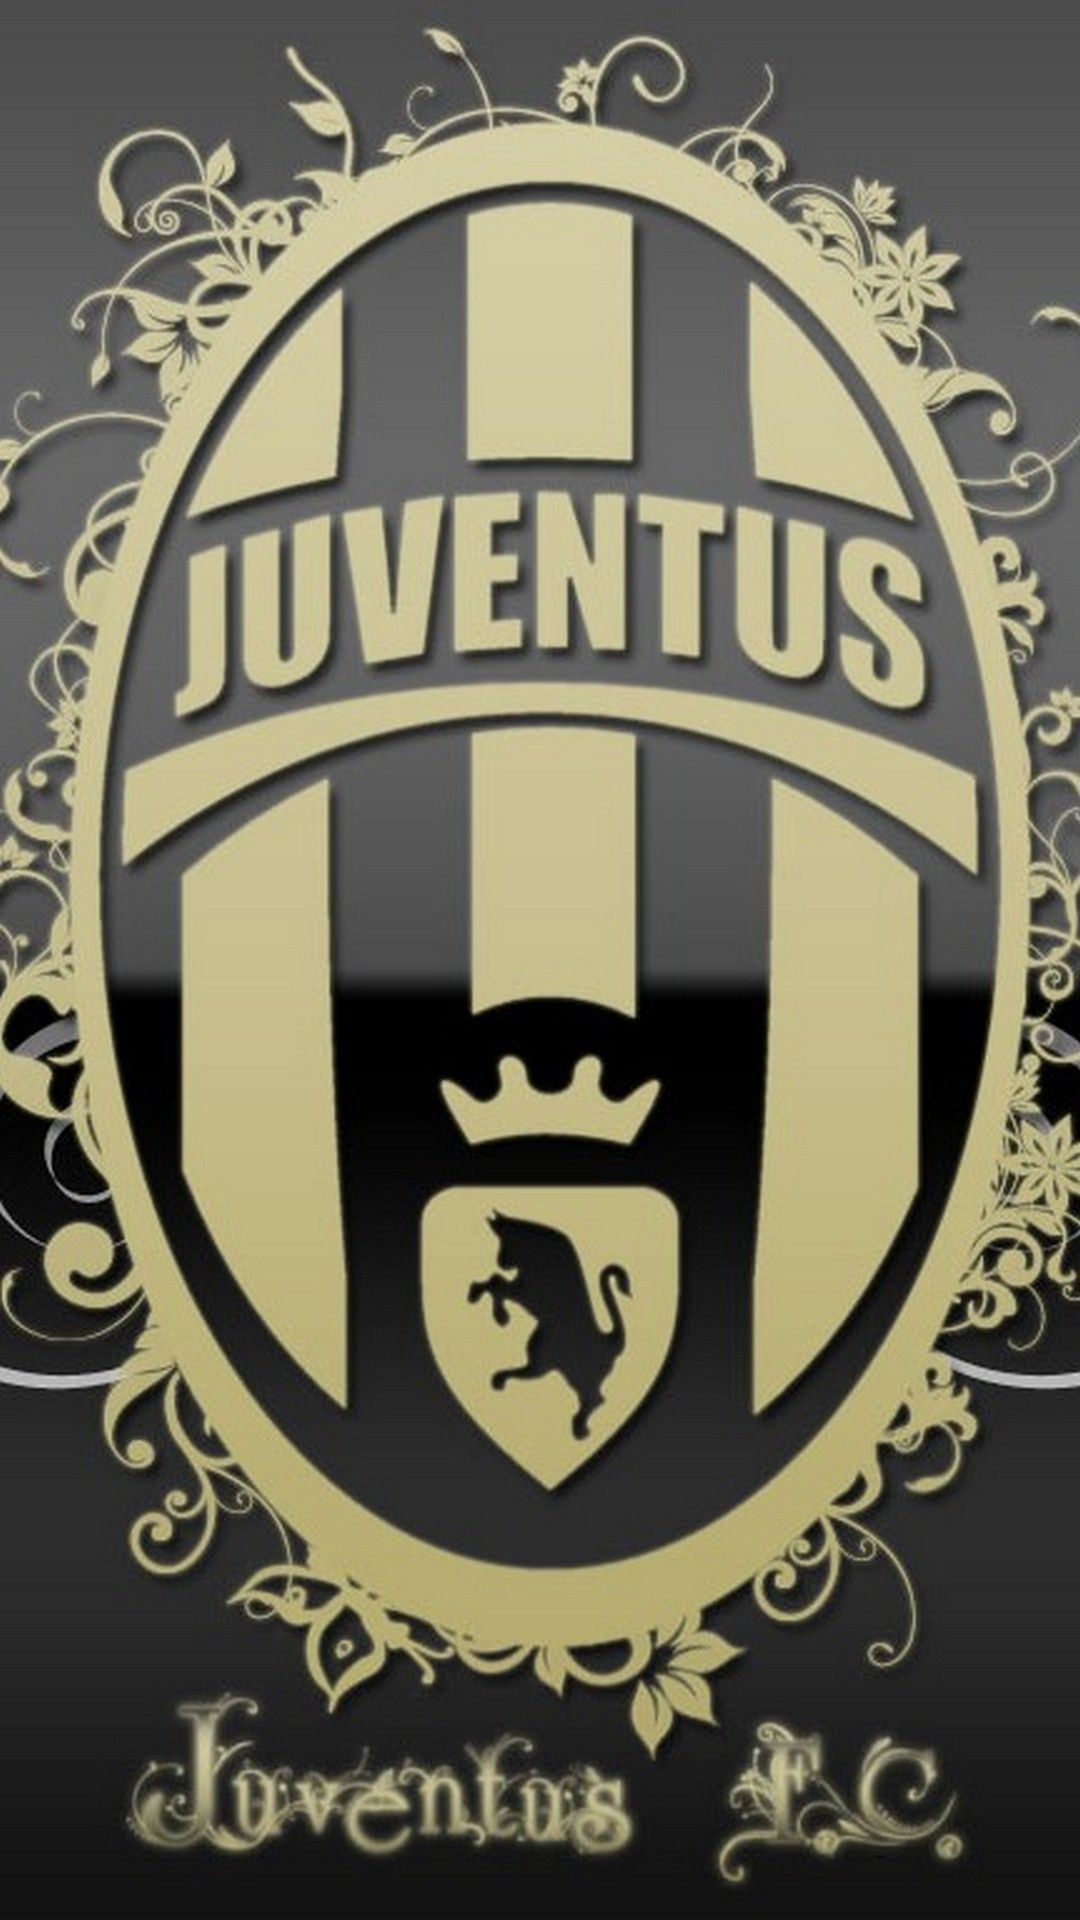 Juventus: One of the top-ten wealthiest in world football in terms of value, revenue and profit since the mid-1990s. 1080x1920 Full HD Background.